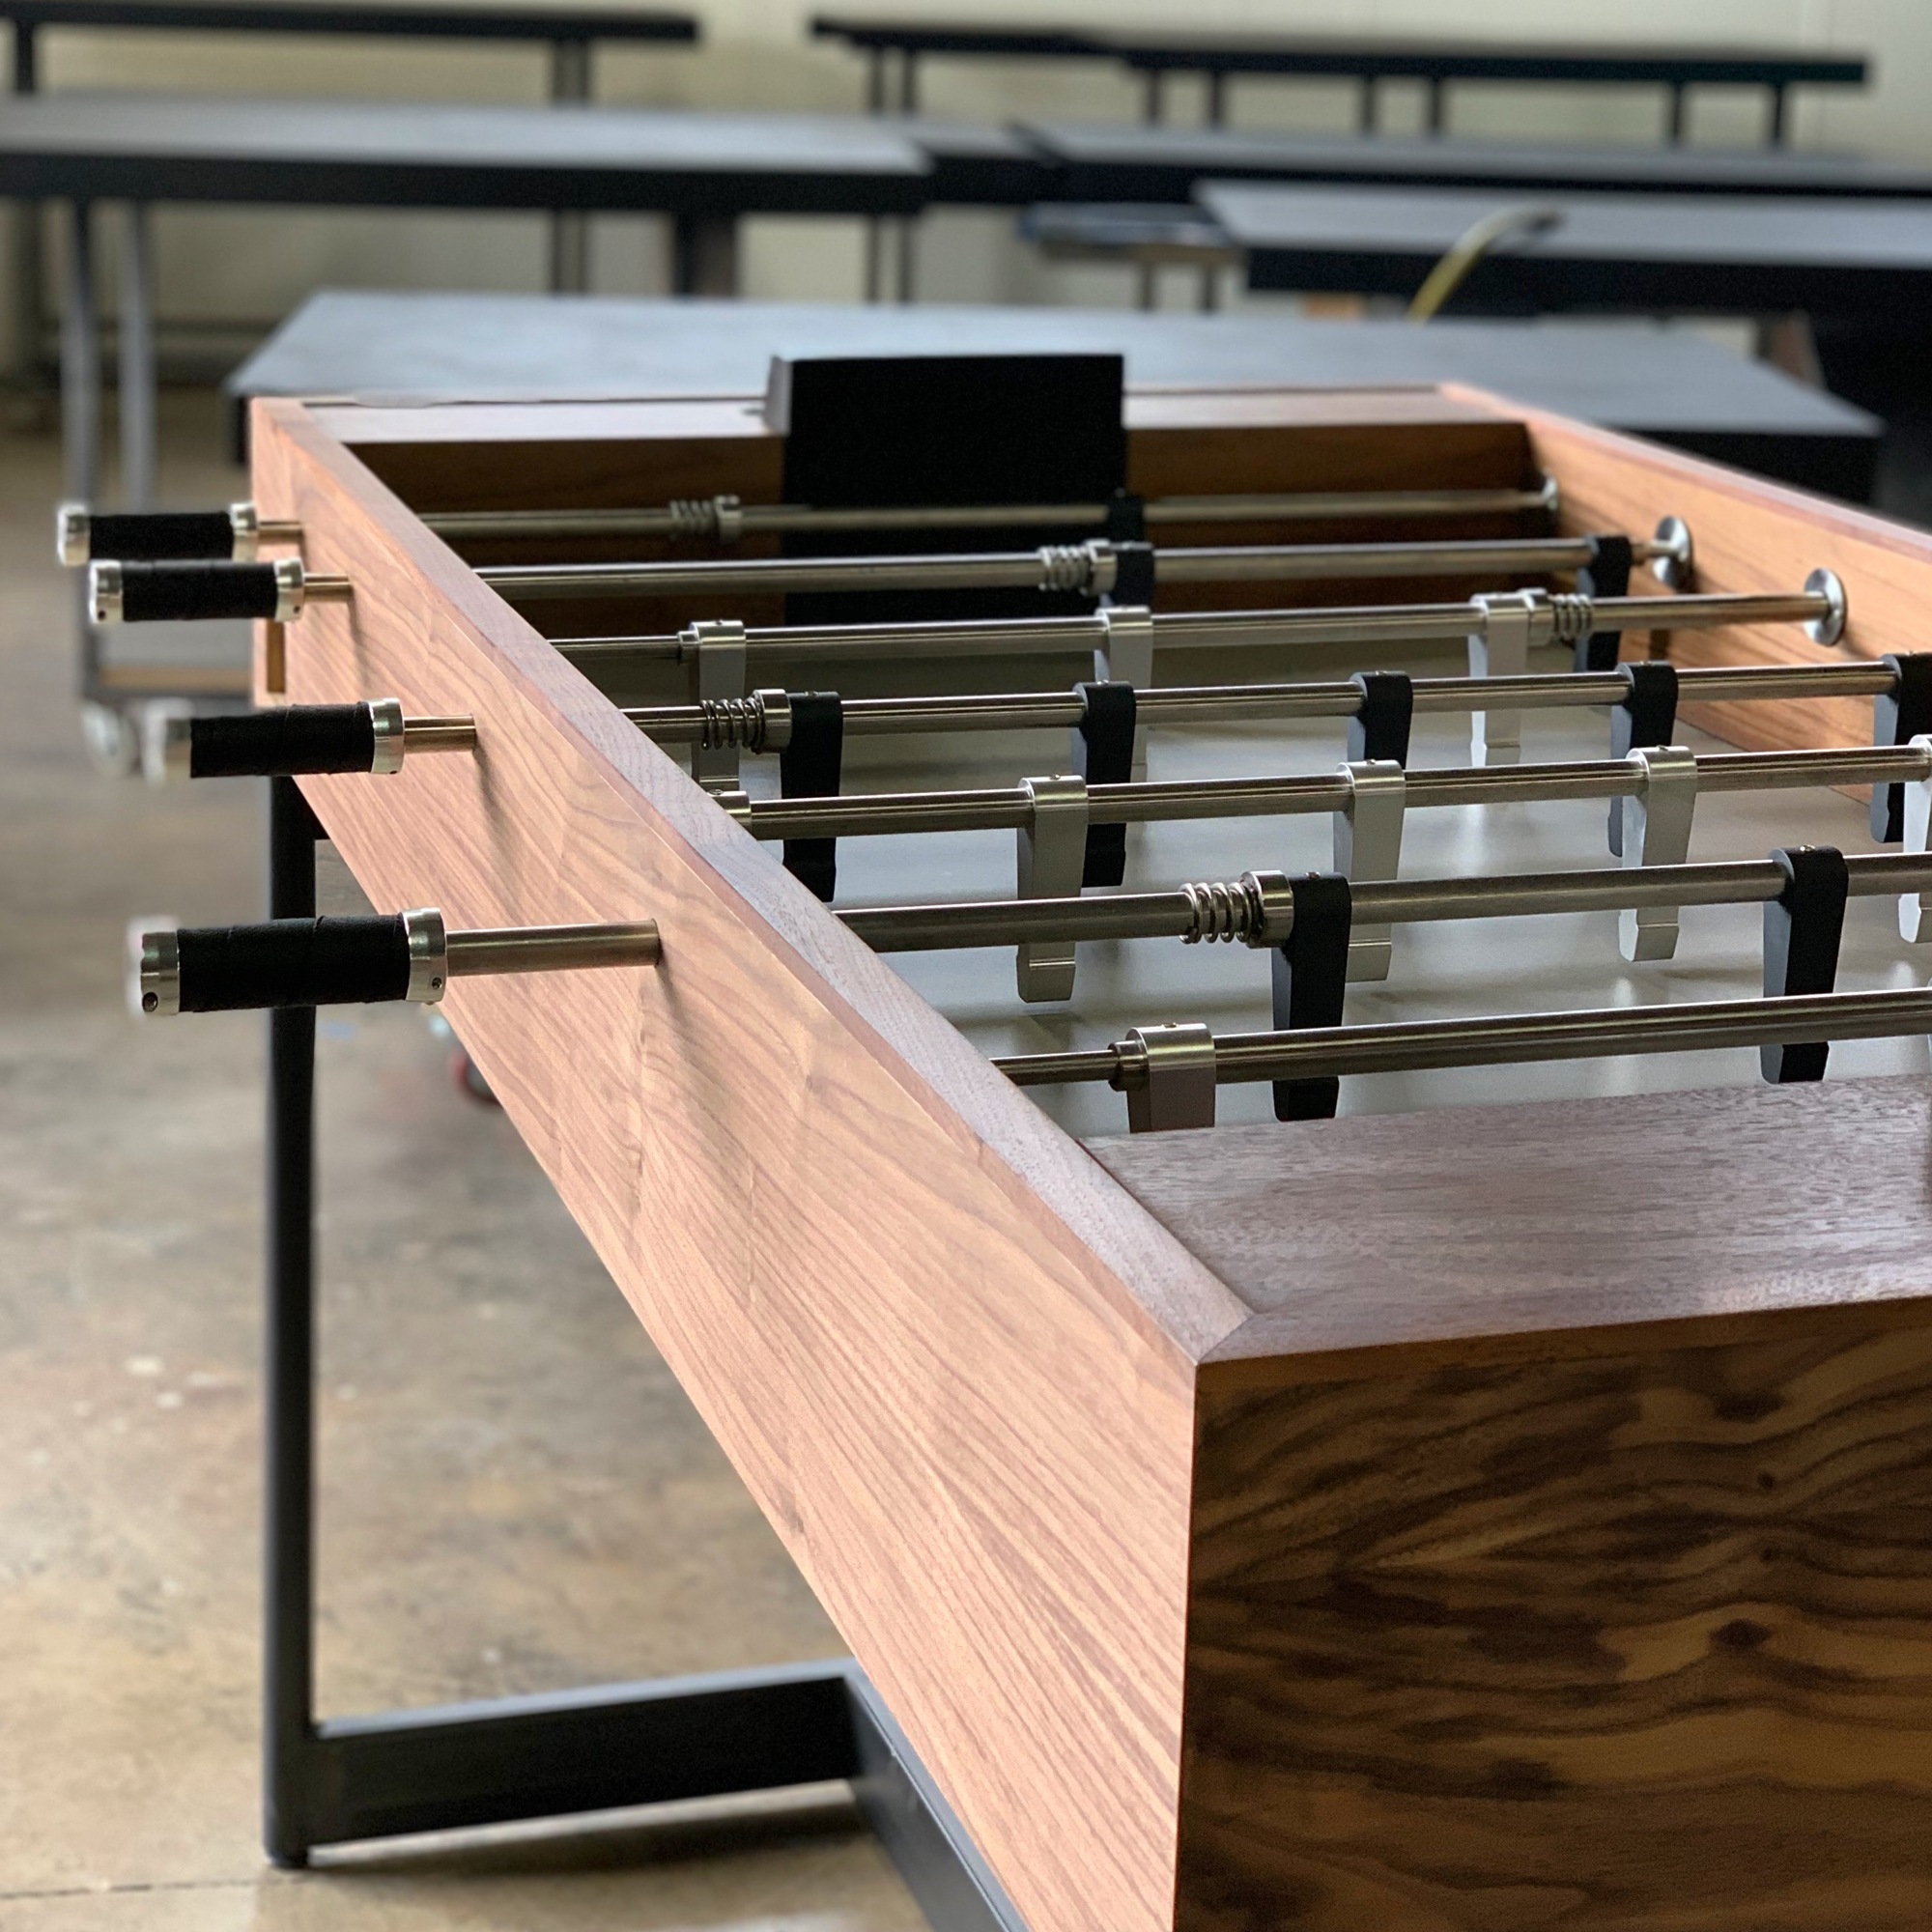 The custom foosball table created by BUILT and won by Chris Akins and Giovanna Rivera. Courtesy photo.